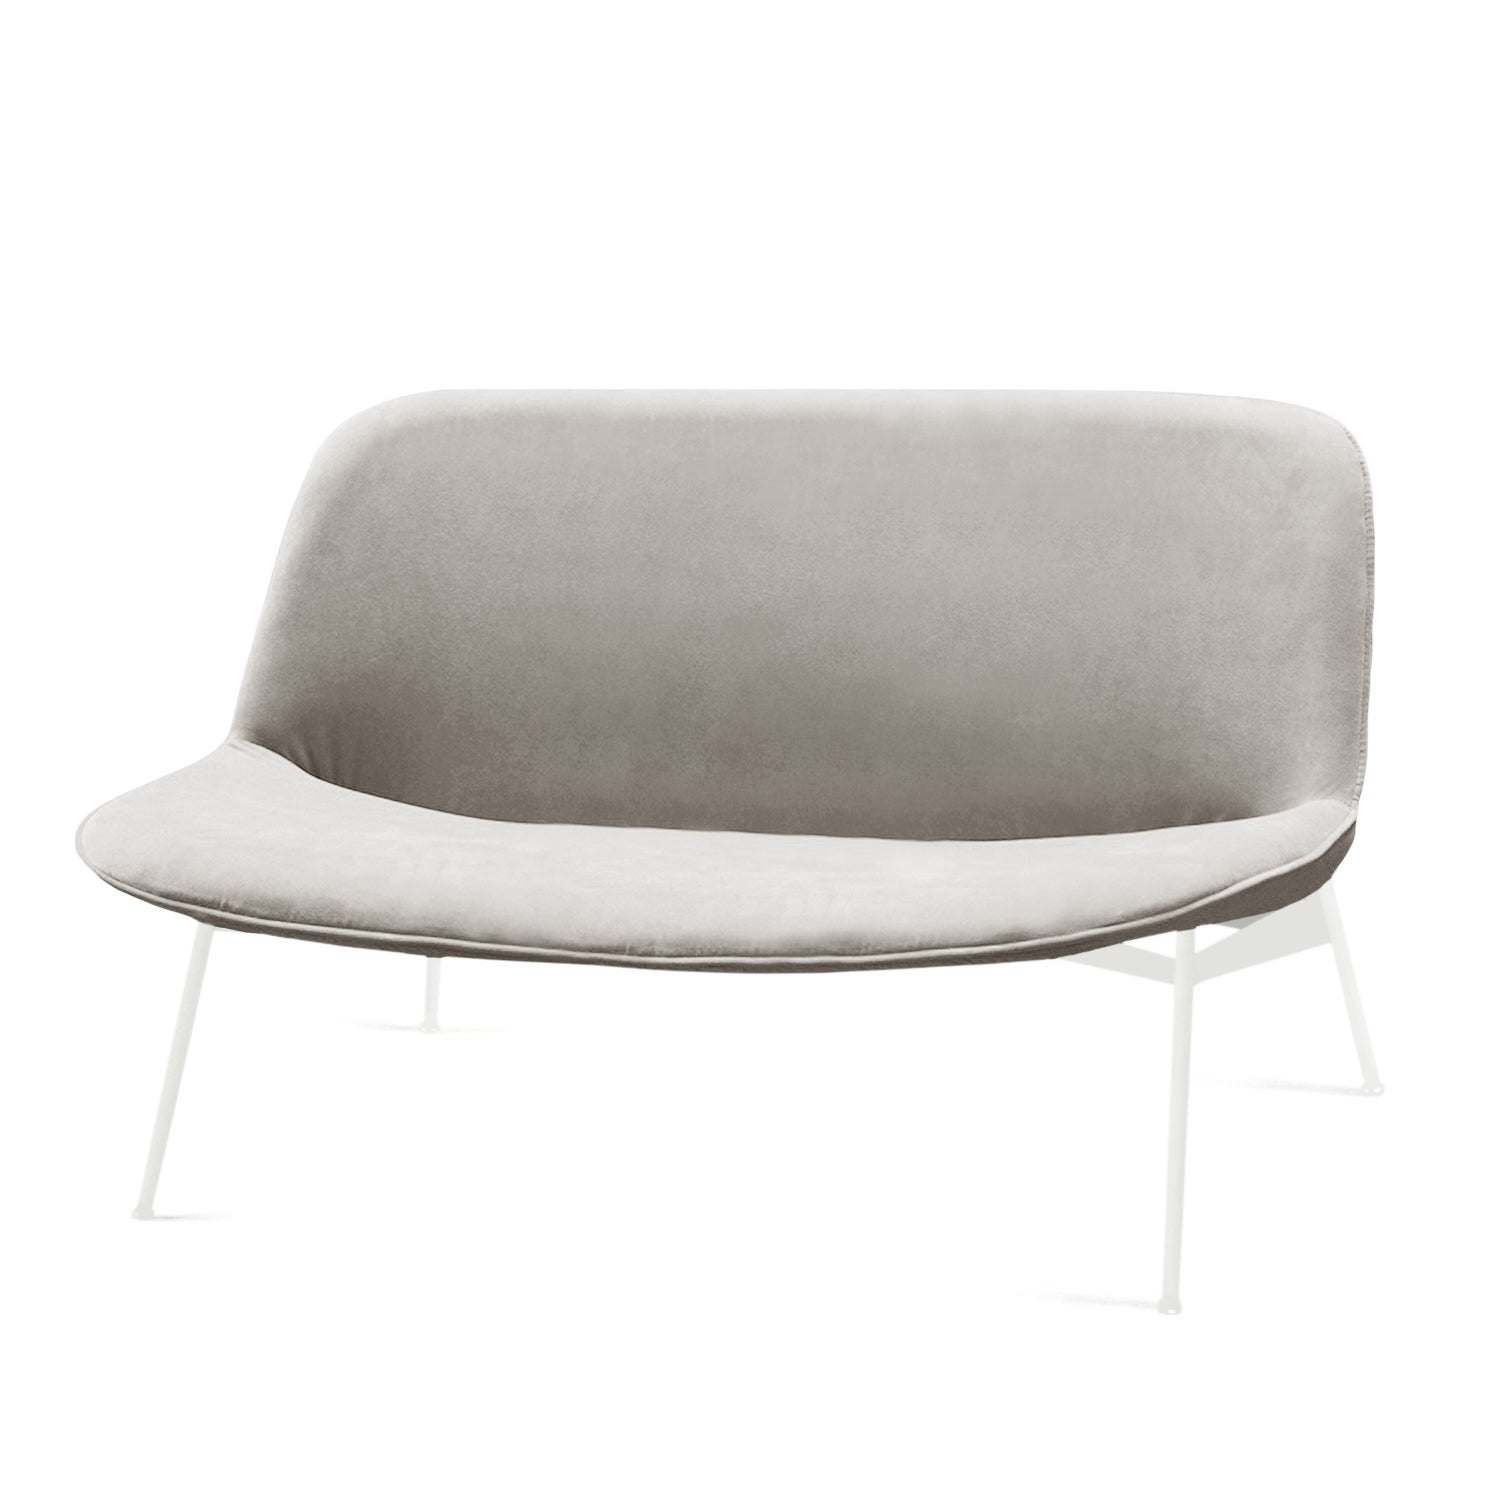 Chiado Sofa, Large with Paris Mouse and White